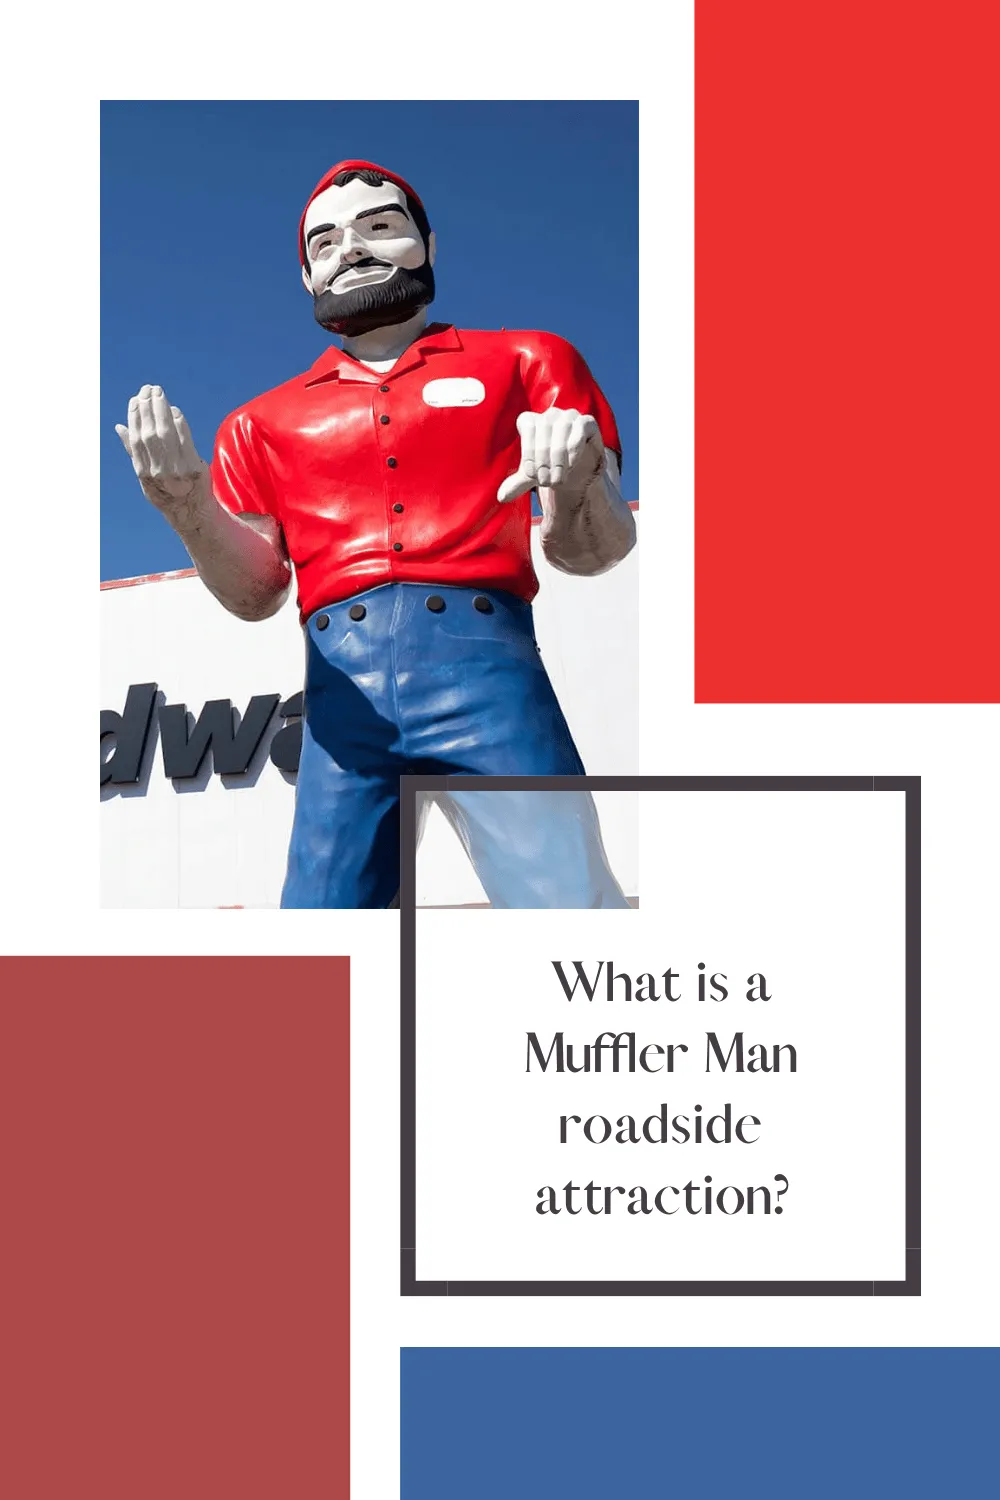 One of the most popular roadside attractions in America is the Muffler Man: a broad, tall, fiberglass man who was originally created as a roadside advertising icon. But exactly what is a muffler man? How can you distinguish between one of these and any other roadside attraction? And what types of these giant men exist? Read on to find out more about these fiberglass giants. #mufflerman #mufflermen #RoadTrip #RoadsideAttraction #RoadsideAttractions